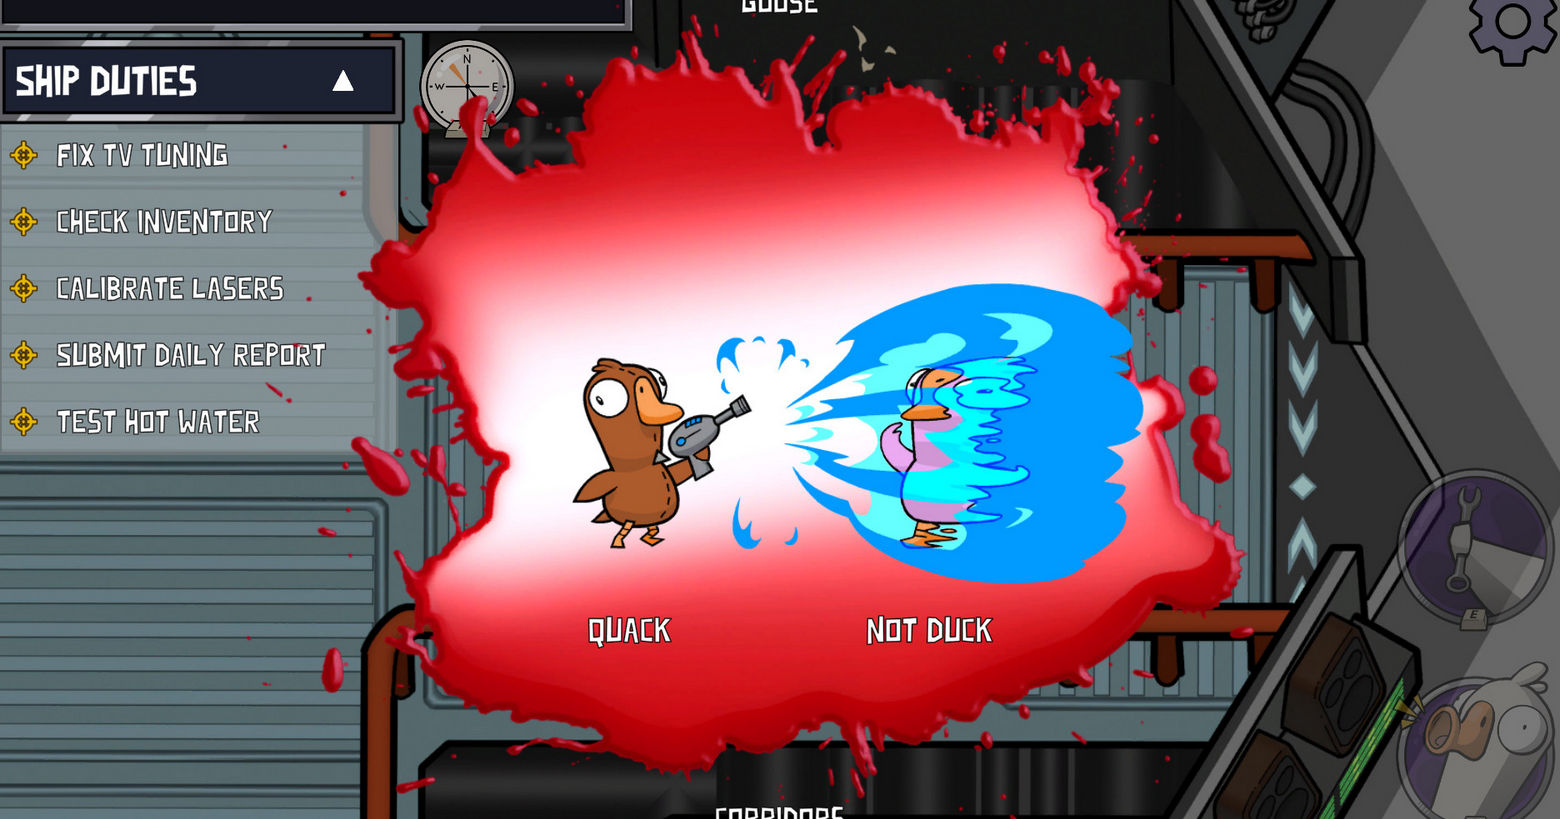 This screenshot shows a moment from the 2D Goose Goose Game in a top-down view, where a goose kills a supposed duck with a blue beam. The scene takes place in a spaceship corridor. There are numerous metallic objects and cables in the picture. However, the room is also very much obscured by a large red blood stain in the center of the image. In front of this stain, a brown-feathered goose stands in profile on the left in the long shot. She is holding a ray gun in her left hand and has just fired a large blue ray at the pink goose standing on the left. Below the left goose is the word "Quack" in white and large letters, and below the right goose is the word "Not Duck" in the same spelling. At the top left is a list titled "Ship Duties" in white capital letters, below which are certain tasks in the same spelling. To understand the game, it is recommended to look at a GGD guide with helpful tips.